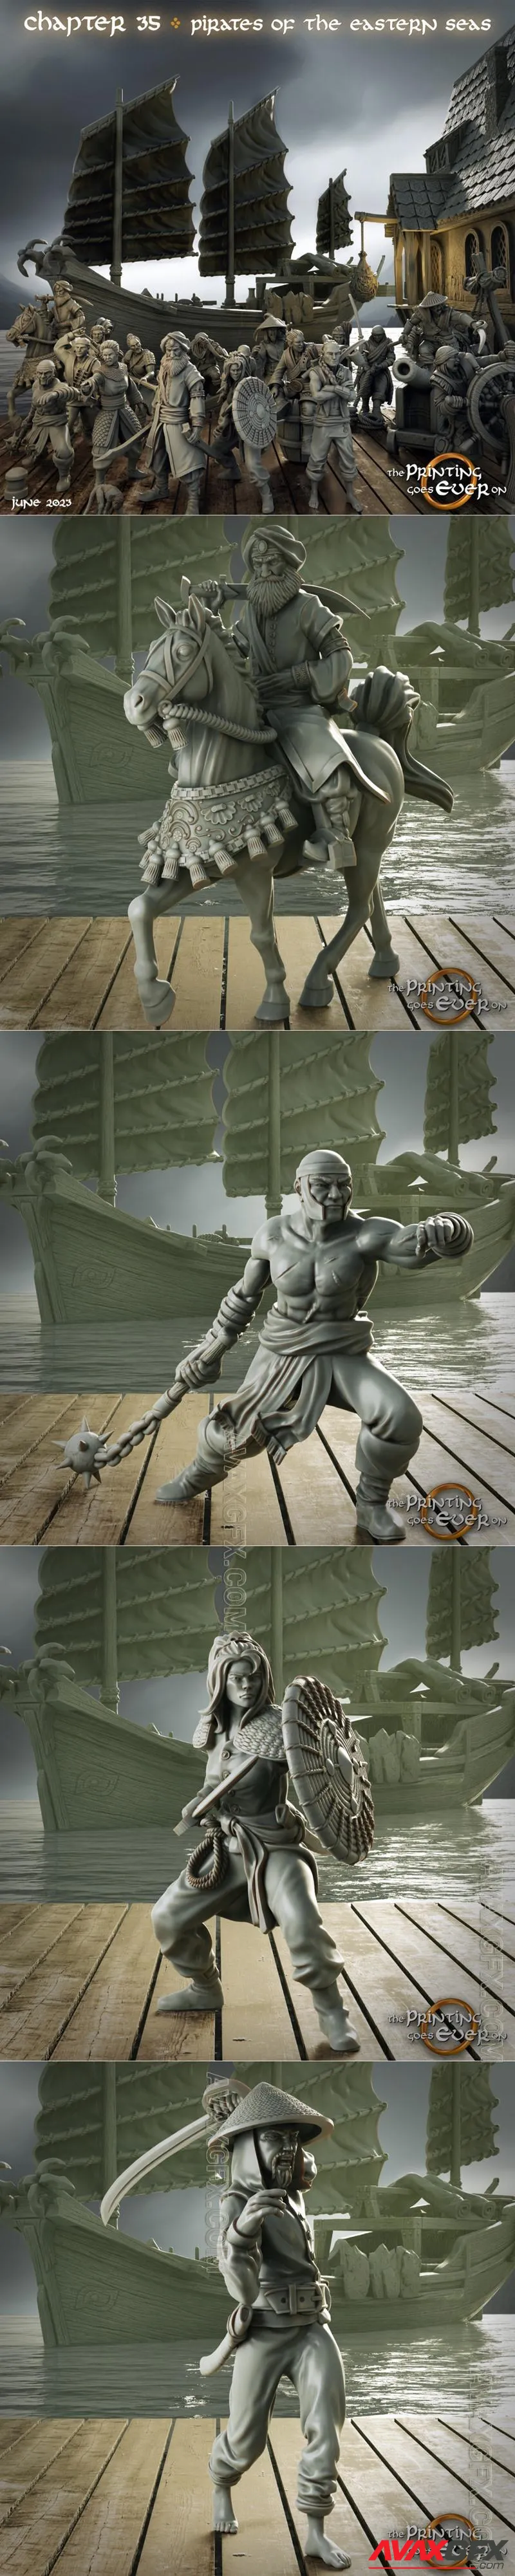 Chapter 35 - Pirates of the Eastern Seas - STL 3D Model